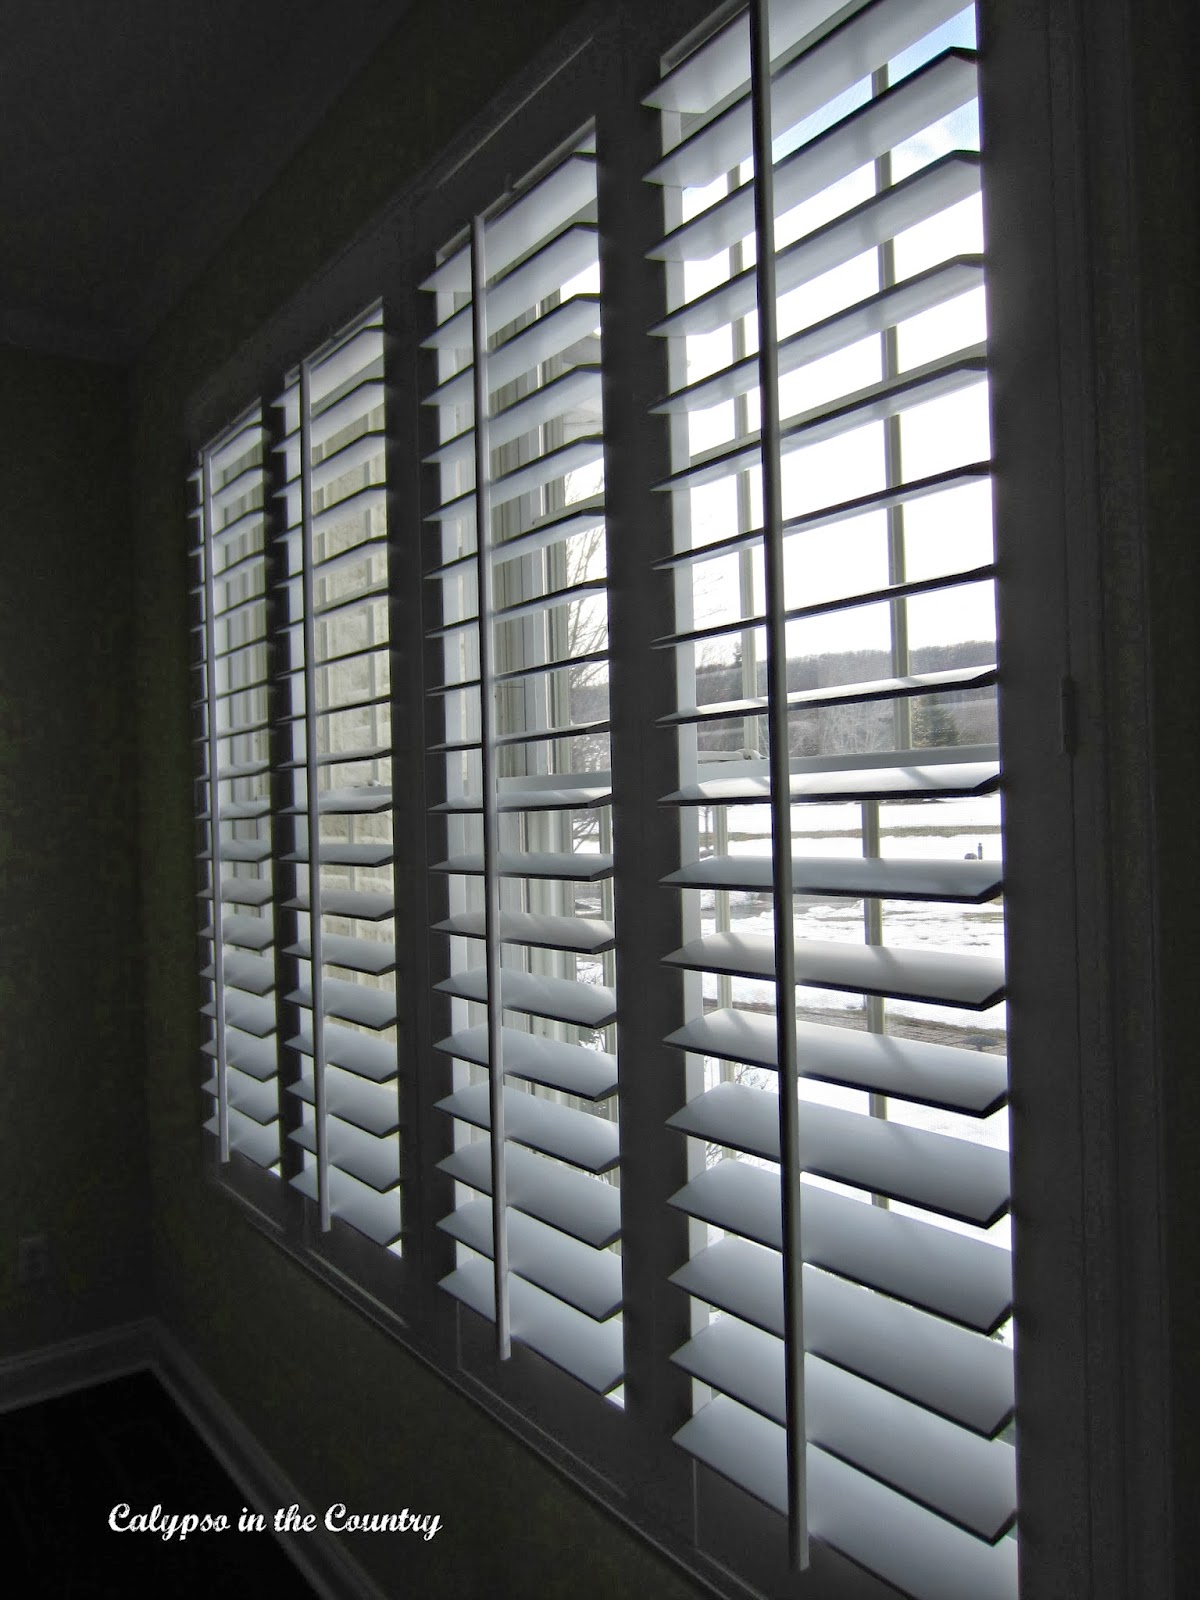 New Plantation Shutters and updated office decor